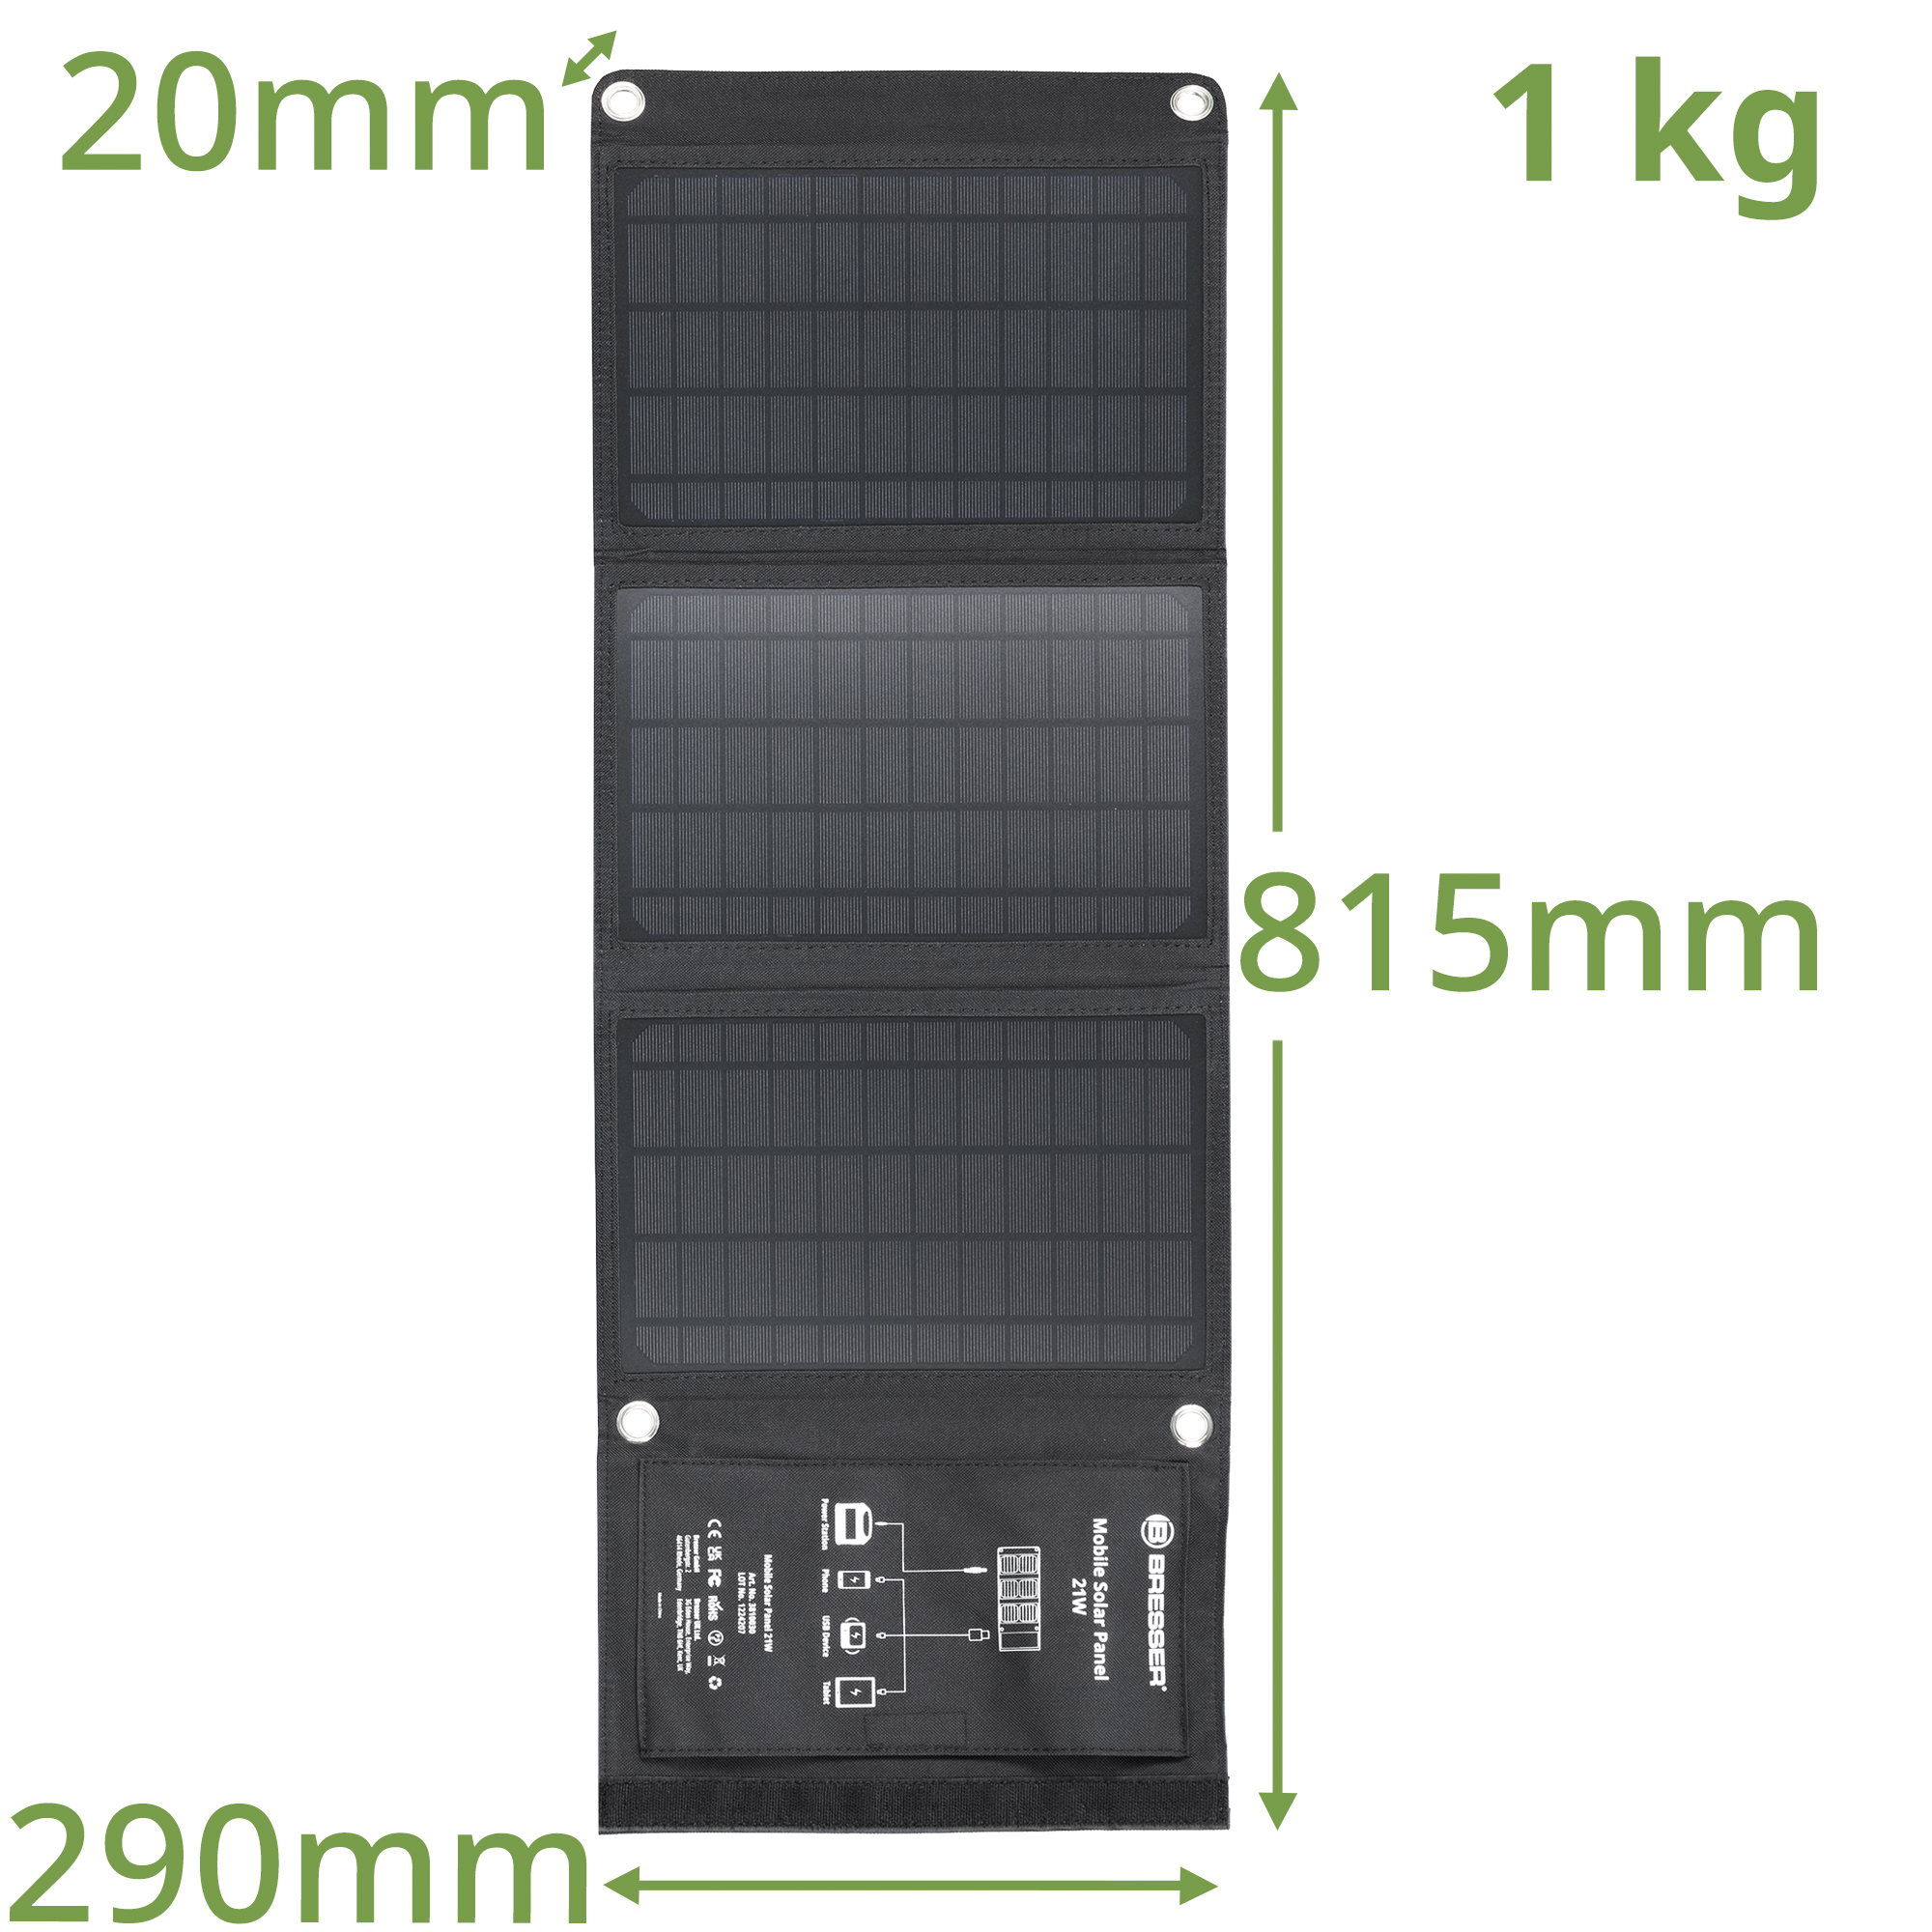 BRESSER Mobile Solar Charger 21 Watt with USB and DC output